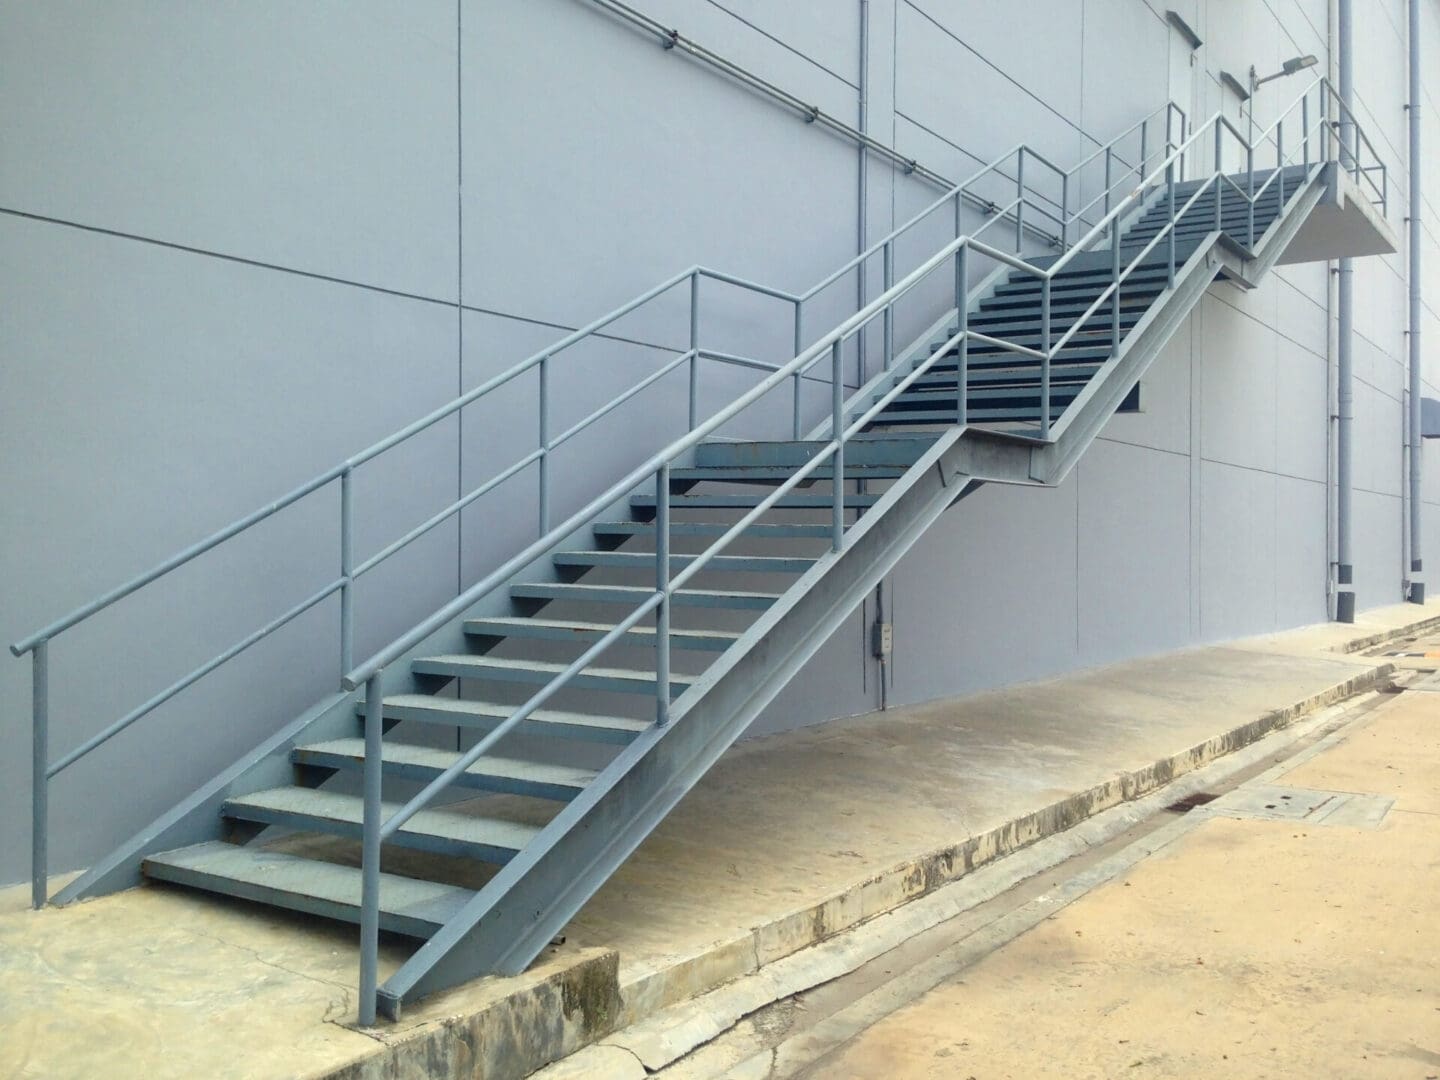 A metal staircase with railing on the side of a building.